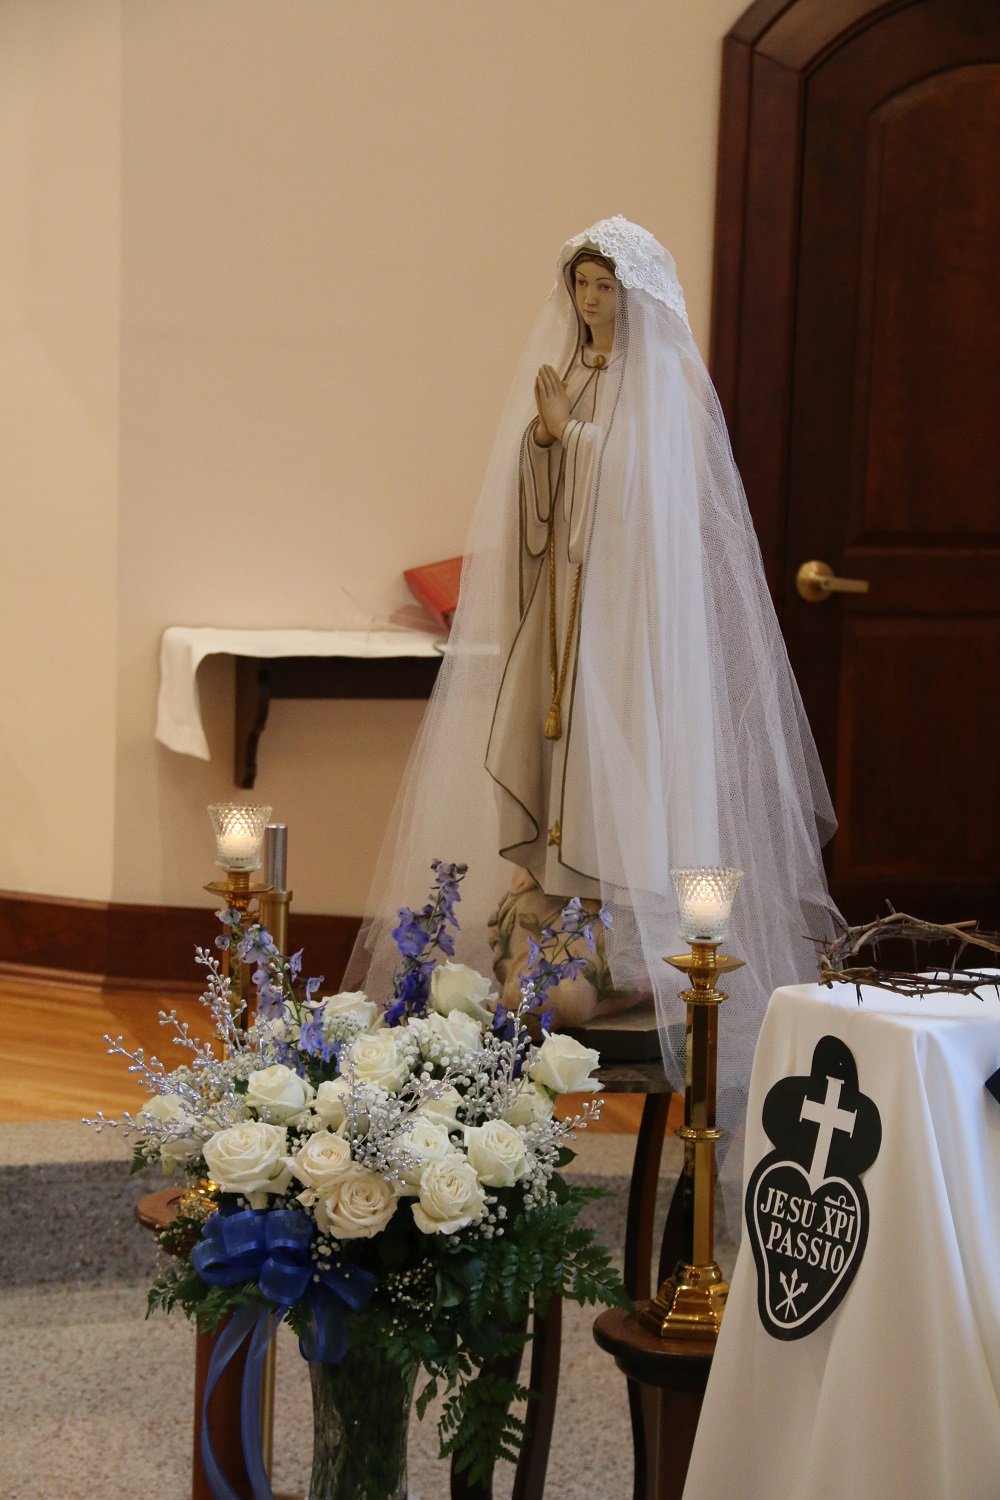  The Immaculate Conception of the Blessed Virgin Mary - what a beautiful feast to have for a wedding day with Christ!   (Photo: Elizabeth Wong Barnstead, Western KY Catholic)  